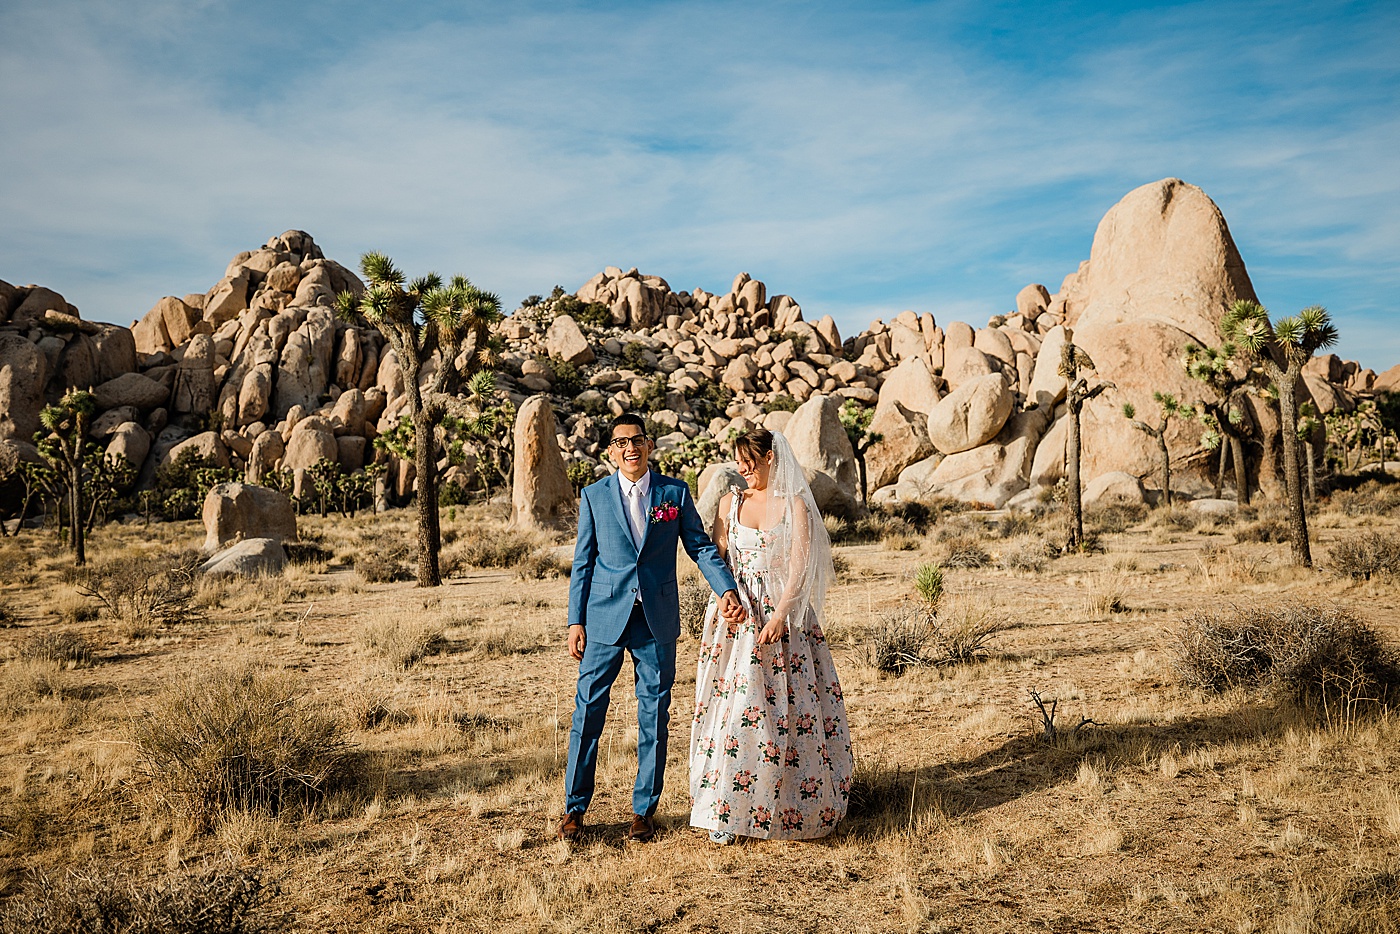 Joshua Tree elopement. A groom in a blue suit, and bride in a floral wedding dress hold hands laughing together in front of a rock formation.